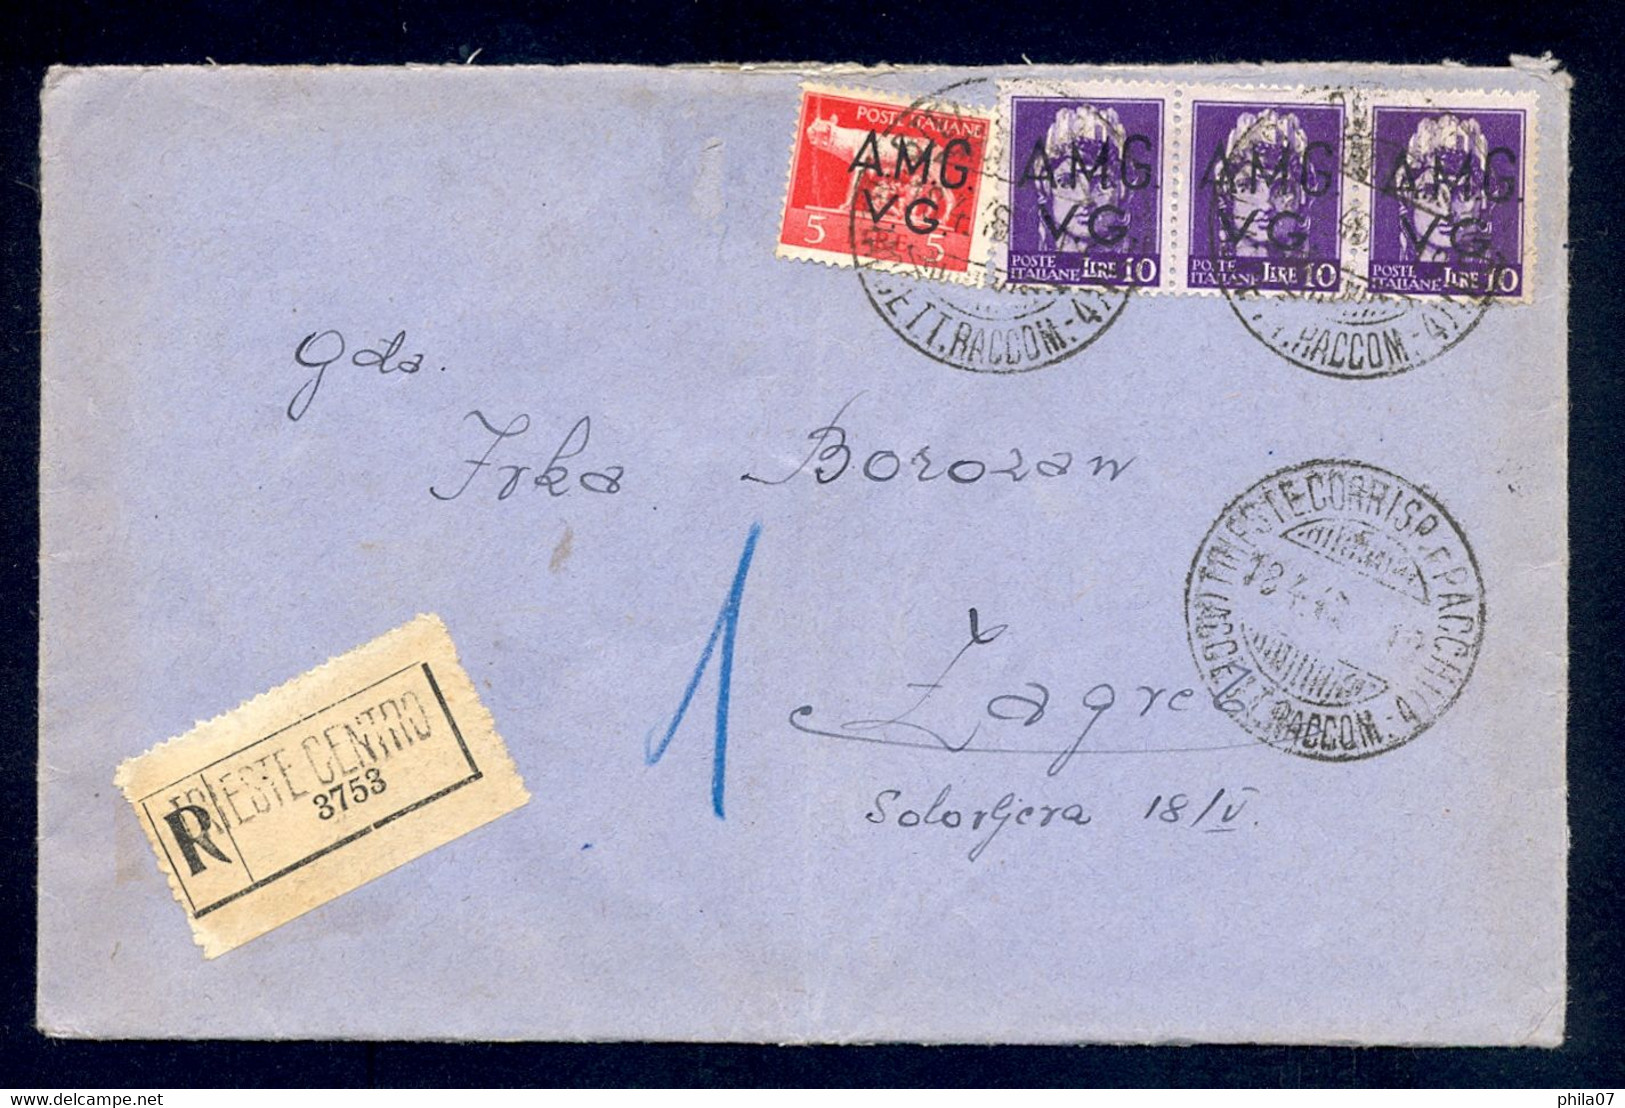 Italy, Trieste ZONA A - Registered Letter, Franked With Provisional Stamps AMG VG And Sent To Zagreb 18.04. 1946. - Yugoslavian Occ.: Trieste